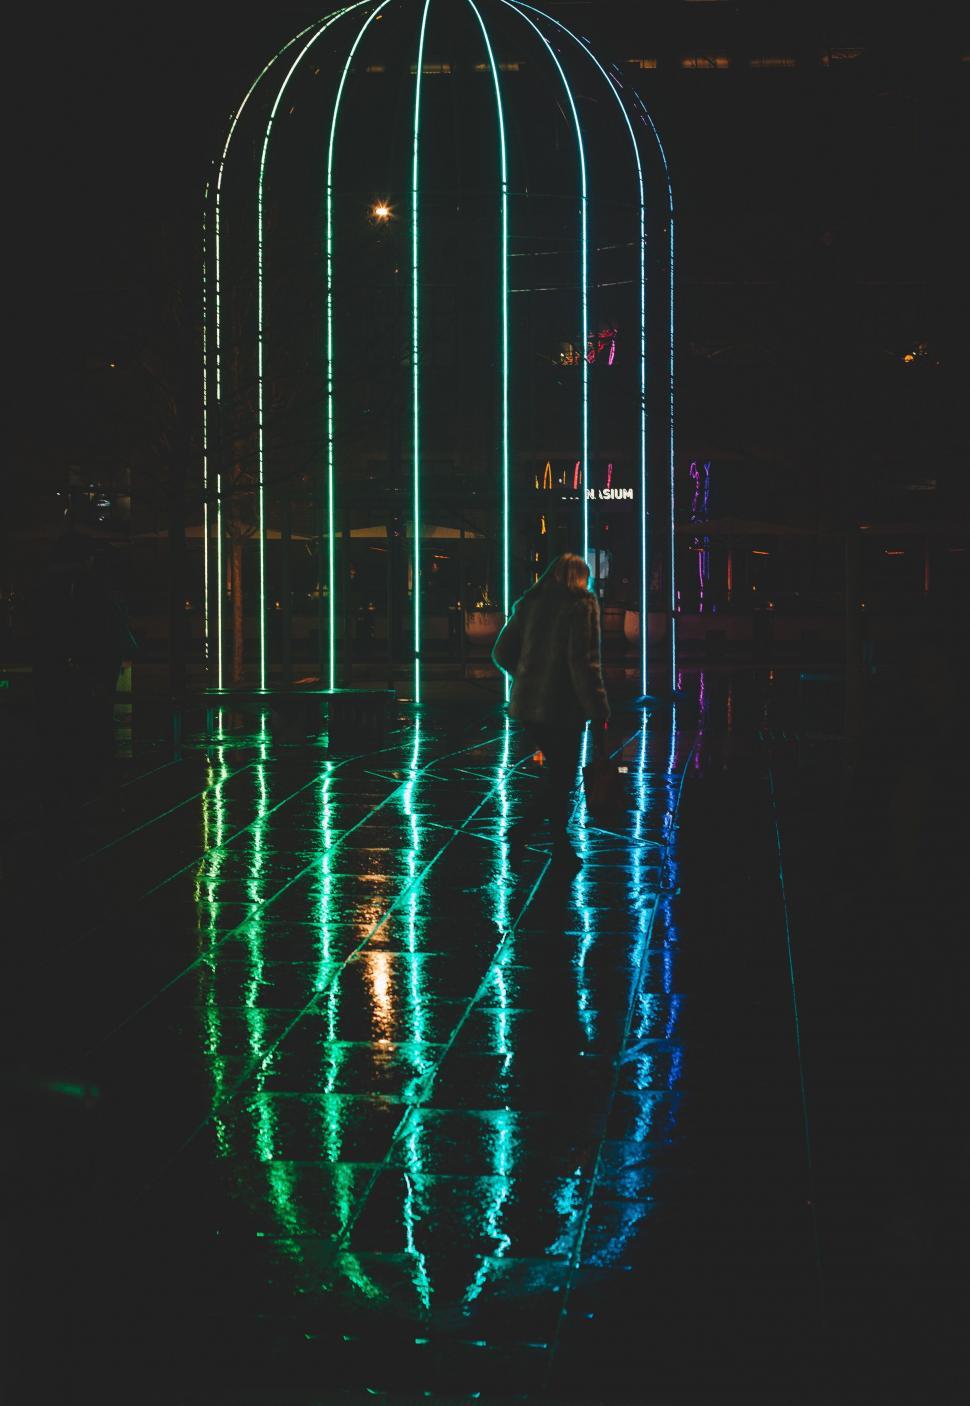 Free Image of Neon cage structure in night cityscape 